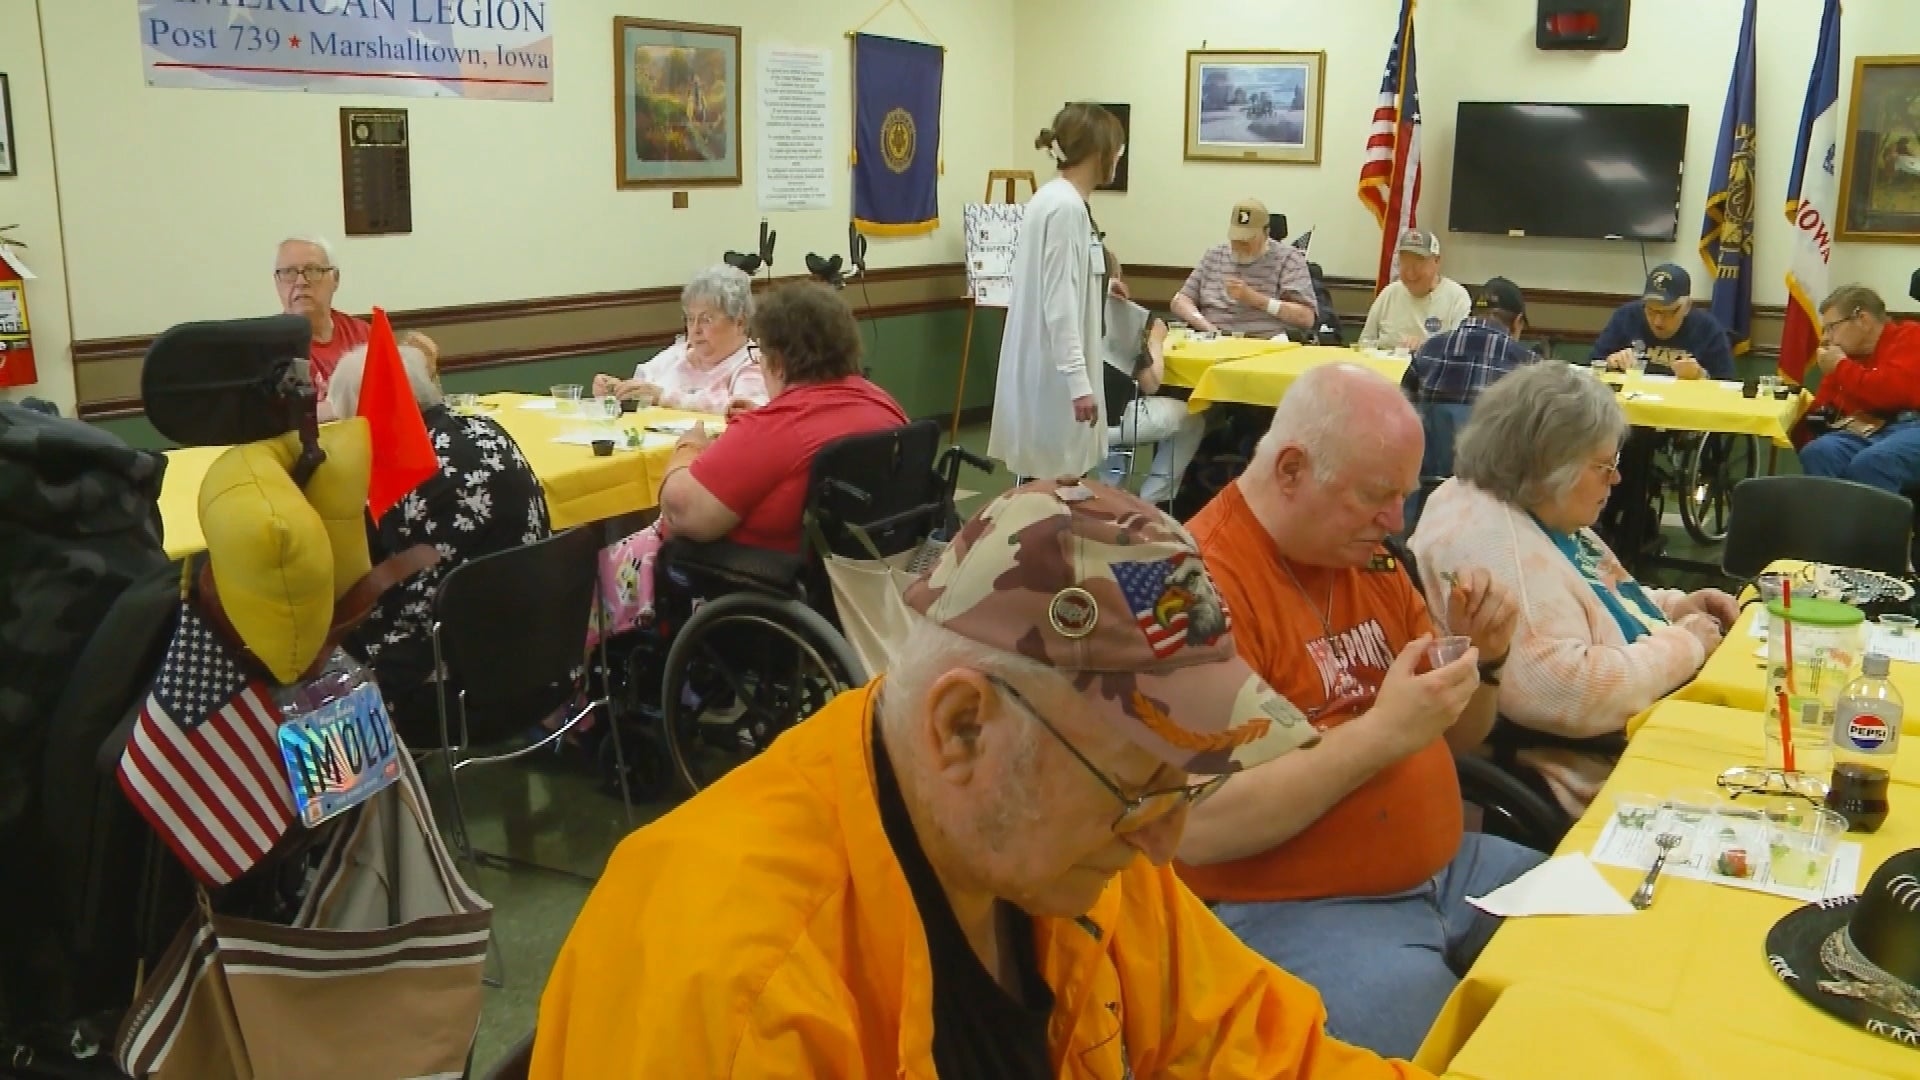 Residents at the Iowa Veterans Home meet with a dietician to try new foods and reminisce.